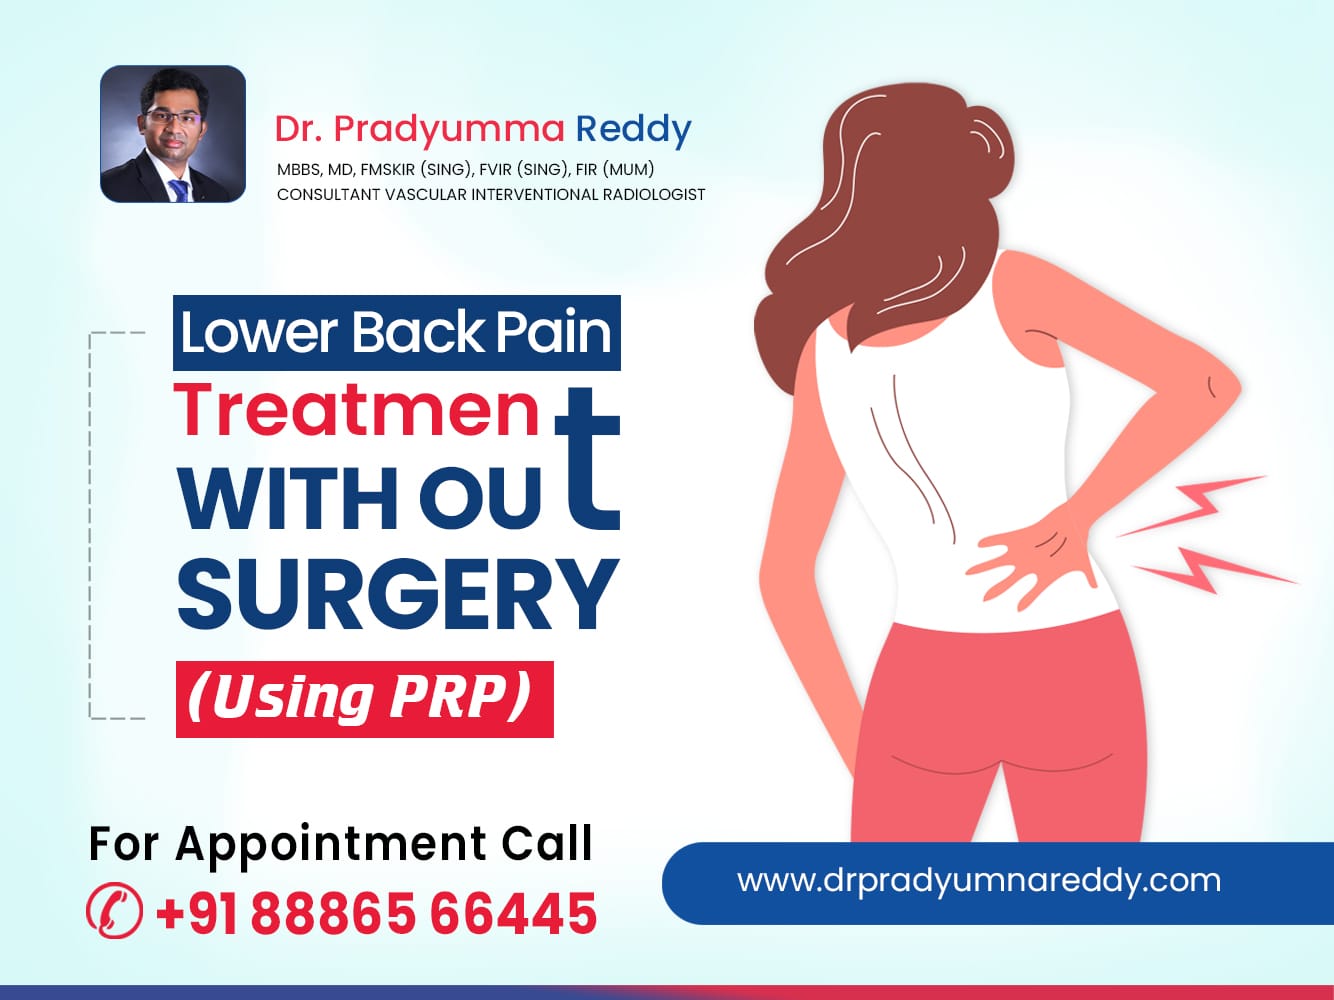 https://drpradyumnareddy.com/wp-content/uploads/2023/05/lower-back-pain-treatment-with-out-surgery-in-hyderabad.jpeg